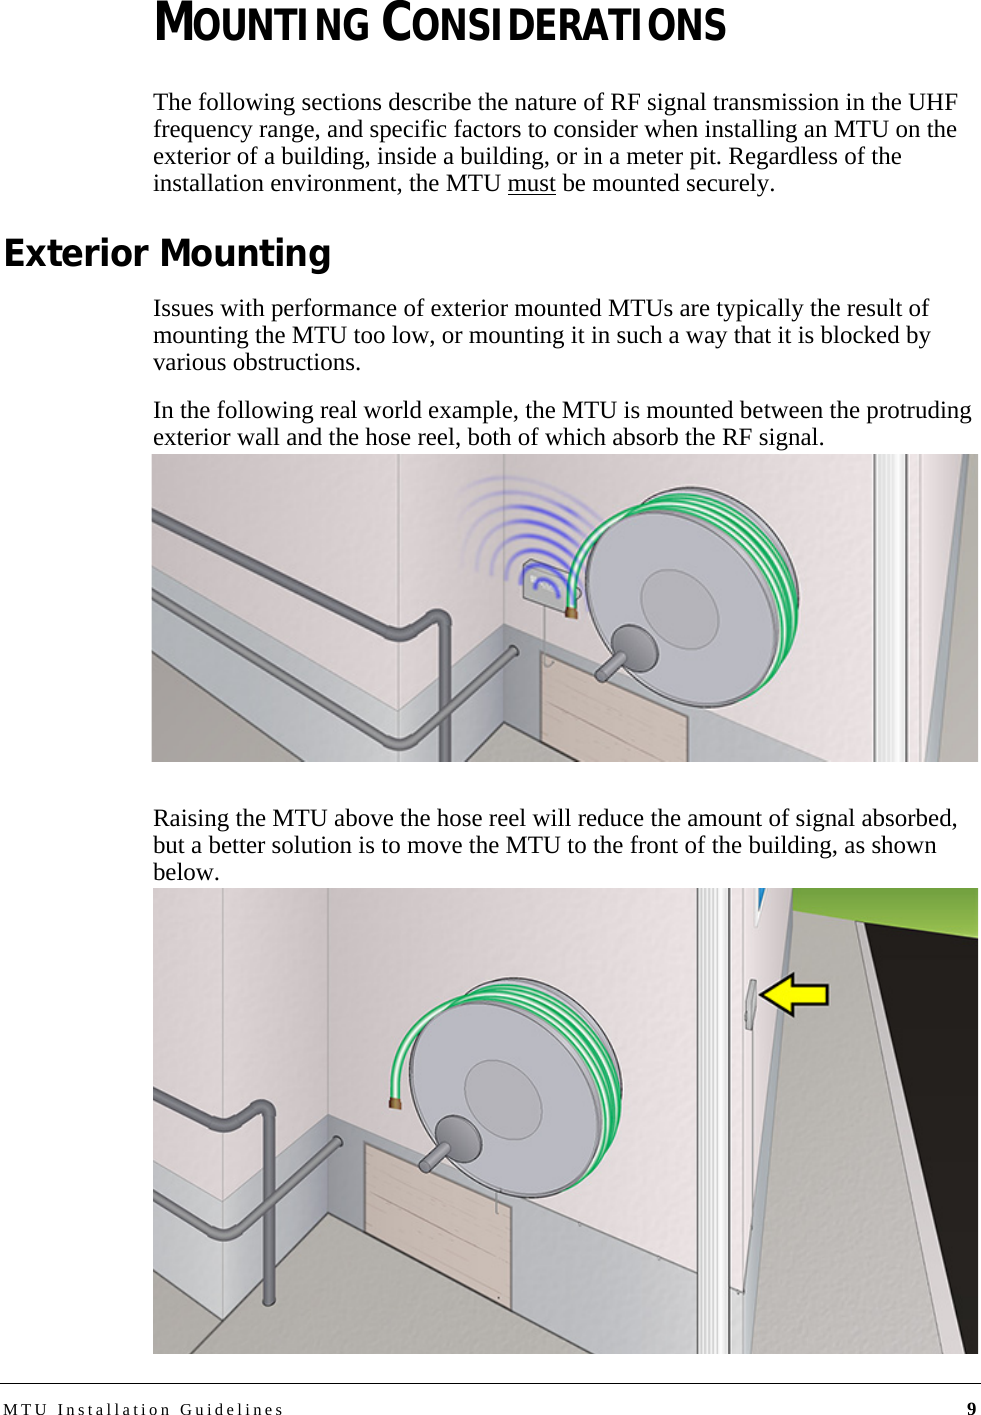 MTU Installation Guidelines 9MOUNTING CONSIDERATIONSThe following sections describe the nature of RF signal transmission in the UHF frequency range, and specific factors to consider when installing an MTU on the exterior of a building, inside a building, or in a meter pit. Regardless of the installation environment, the MTU must be mounted securely.Exterior MountingIssues with performance of exterior mounted MTUs are typically the result of mounting the MTU too low, or mounting it in such a way that it is blocked by various obstructions.In the following real world example, the MTU is mounted between the protruding exterior wall and the hose reel, both of which absorb the RF signal. Raising the MTU above the hose reel will reduce the amount of signal absorbed, but a better solution is to move the MTU to the front of the building, as shown below.